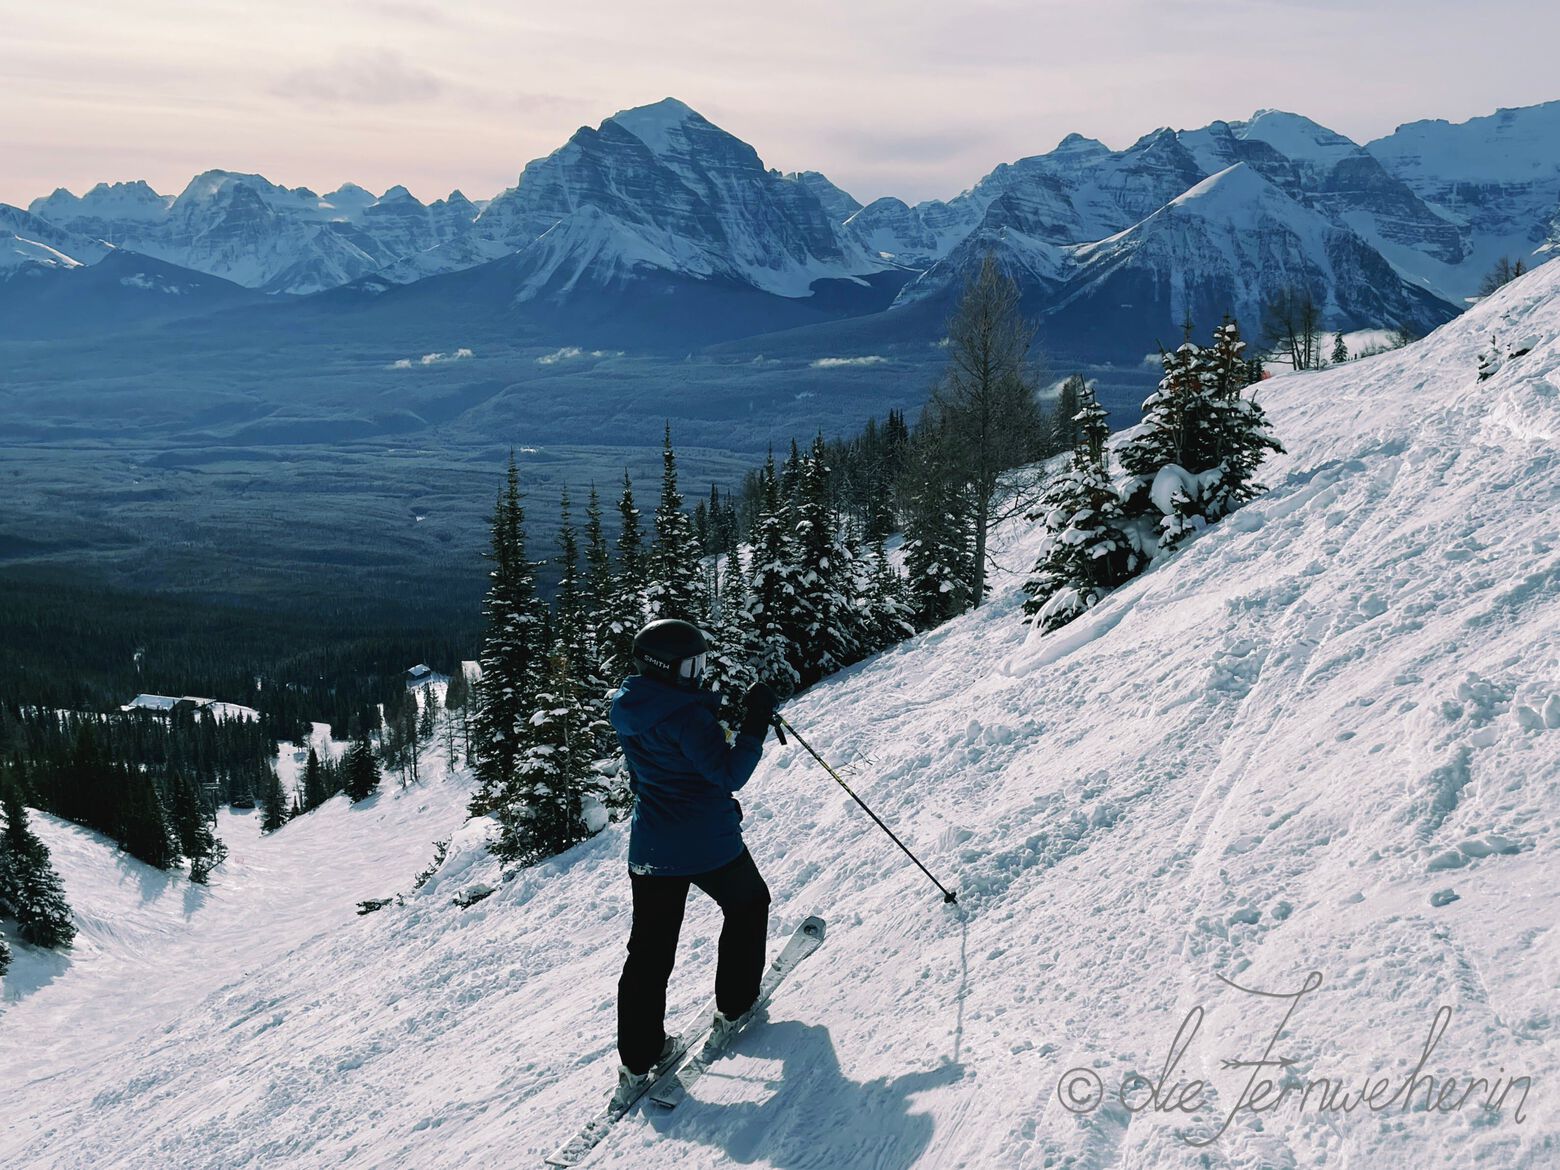 A skier poses on a steep slope at Lake Louise Ski Resort in Banff National Park.